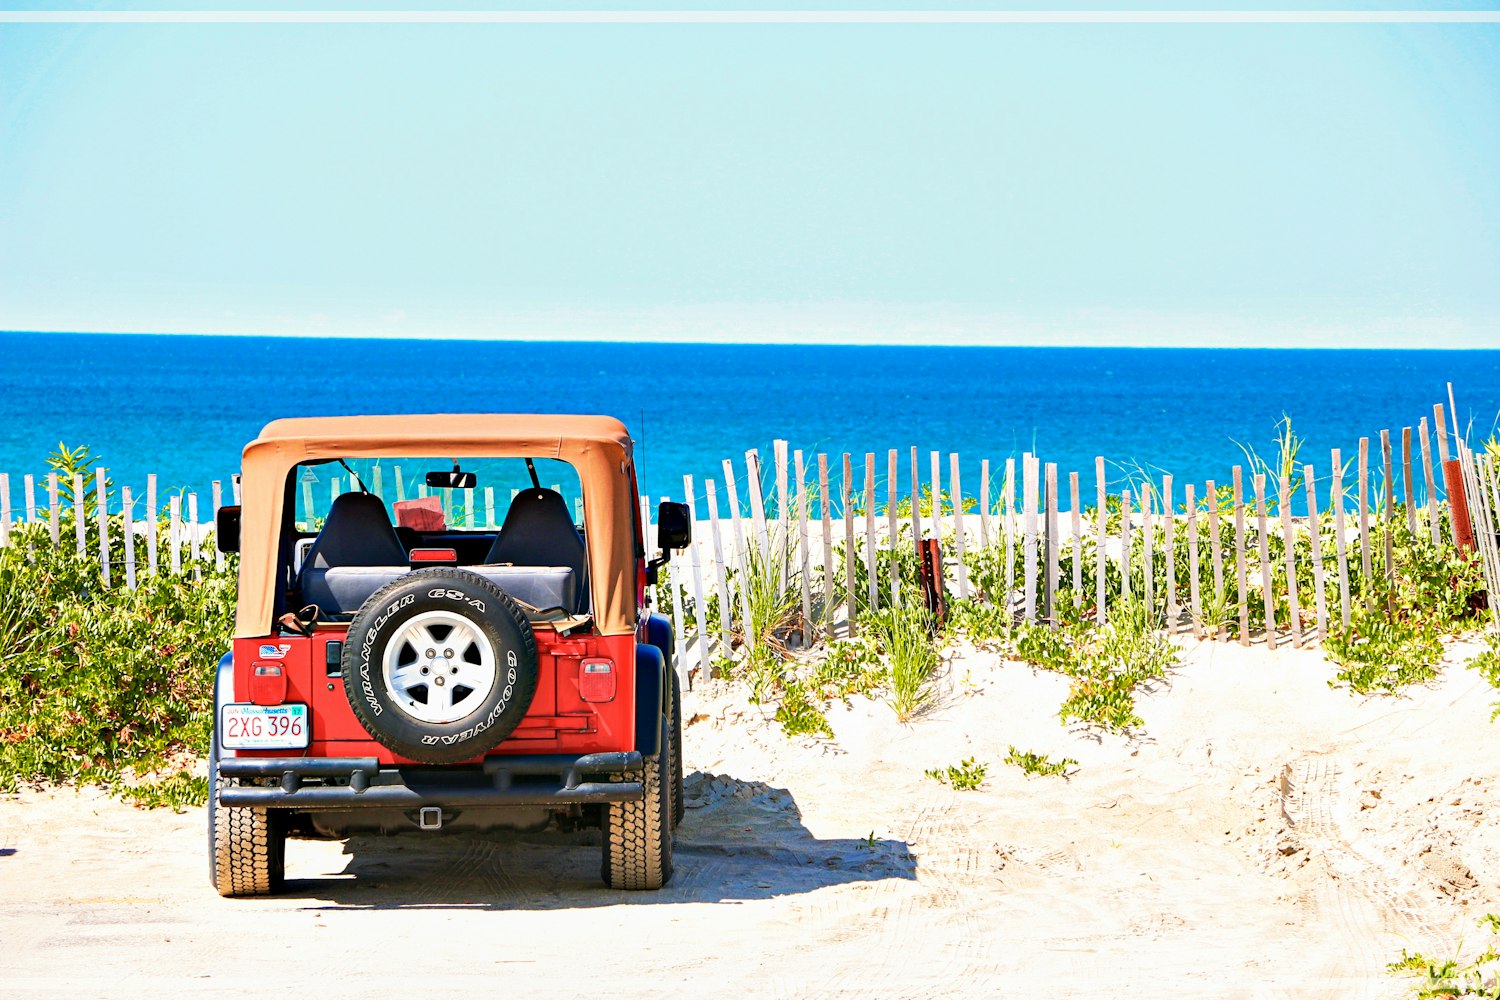 Jeep with Massachusetts plates parked near a beach.